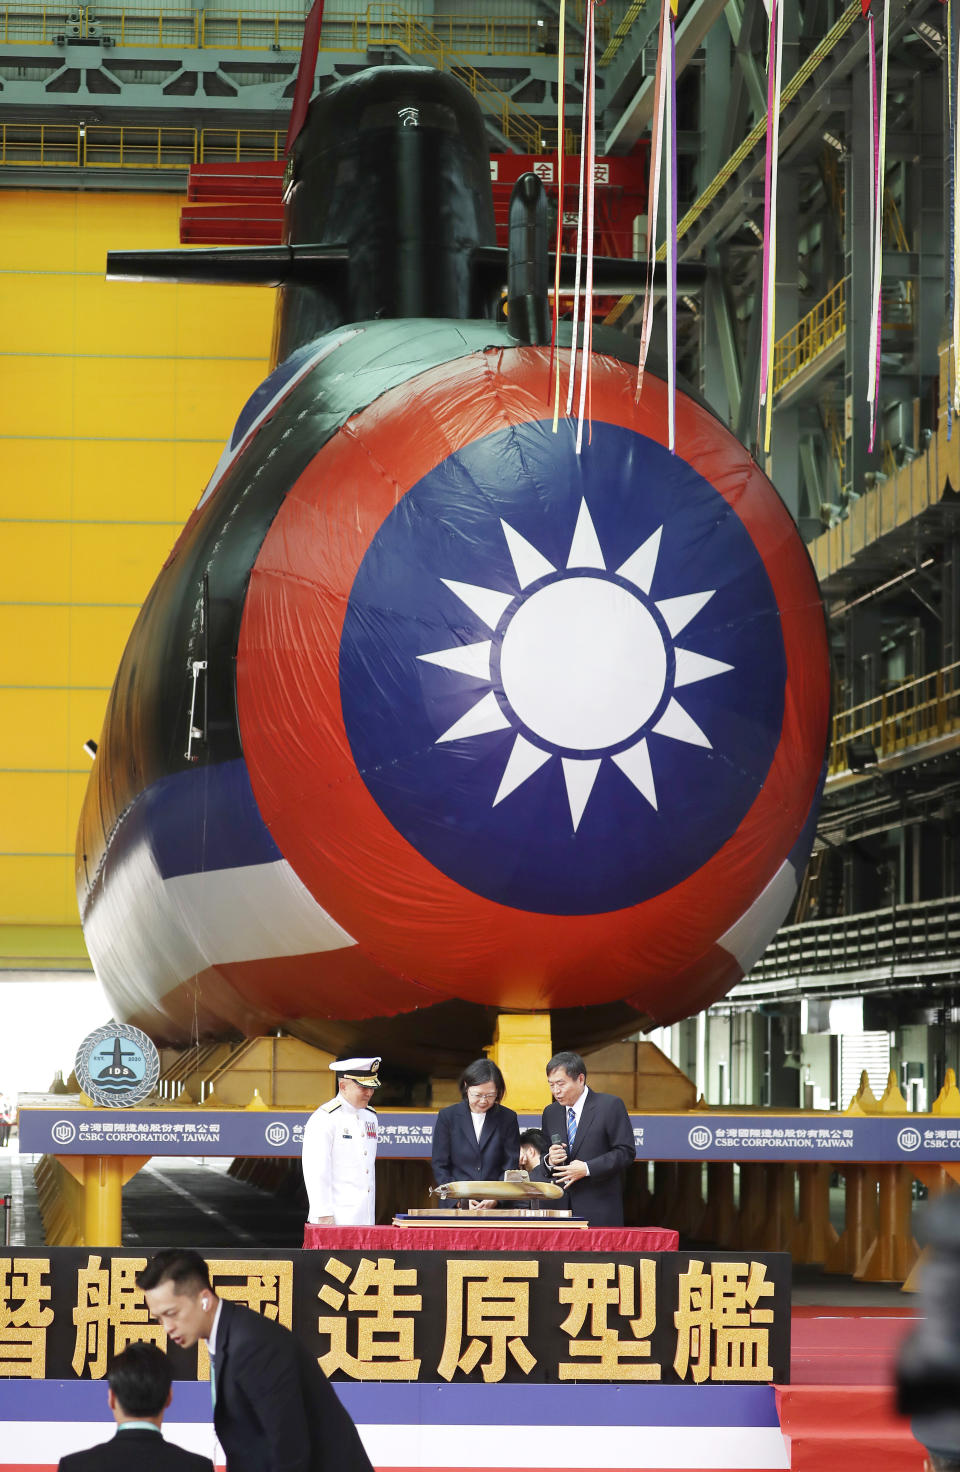 Taiwan's President Tsai Ing-wen, center, standing in front of a covered submarine, attends the launching ceremony of domestically-made submarines at CSBC Corp's shipyards in Kaohsiung, Southern Taiwan, Thursday, Sept. 28, 2023. The submarine, if successful in its tests, will be a major breakthrough for Taiwan in shipbuilding and design. (AP Photo/Chiang Ying-ying)